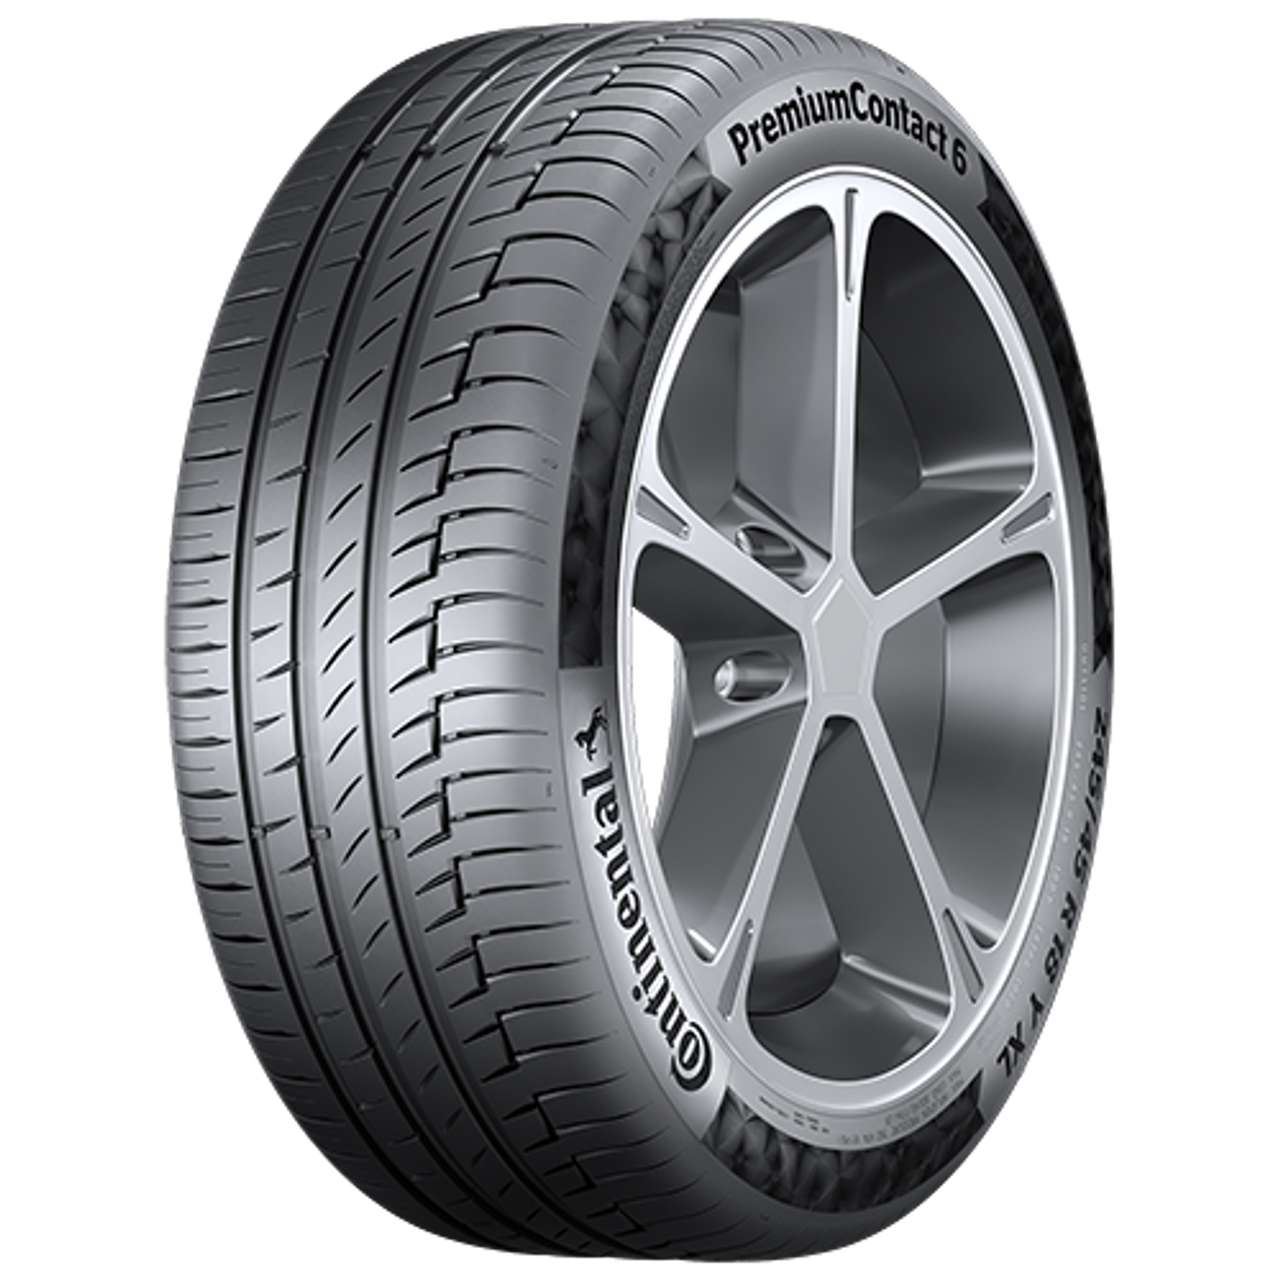 CONTINENTAL PREMIUMCONTACT 6 (NF0) (EVc) 275/45R19 108Y FR